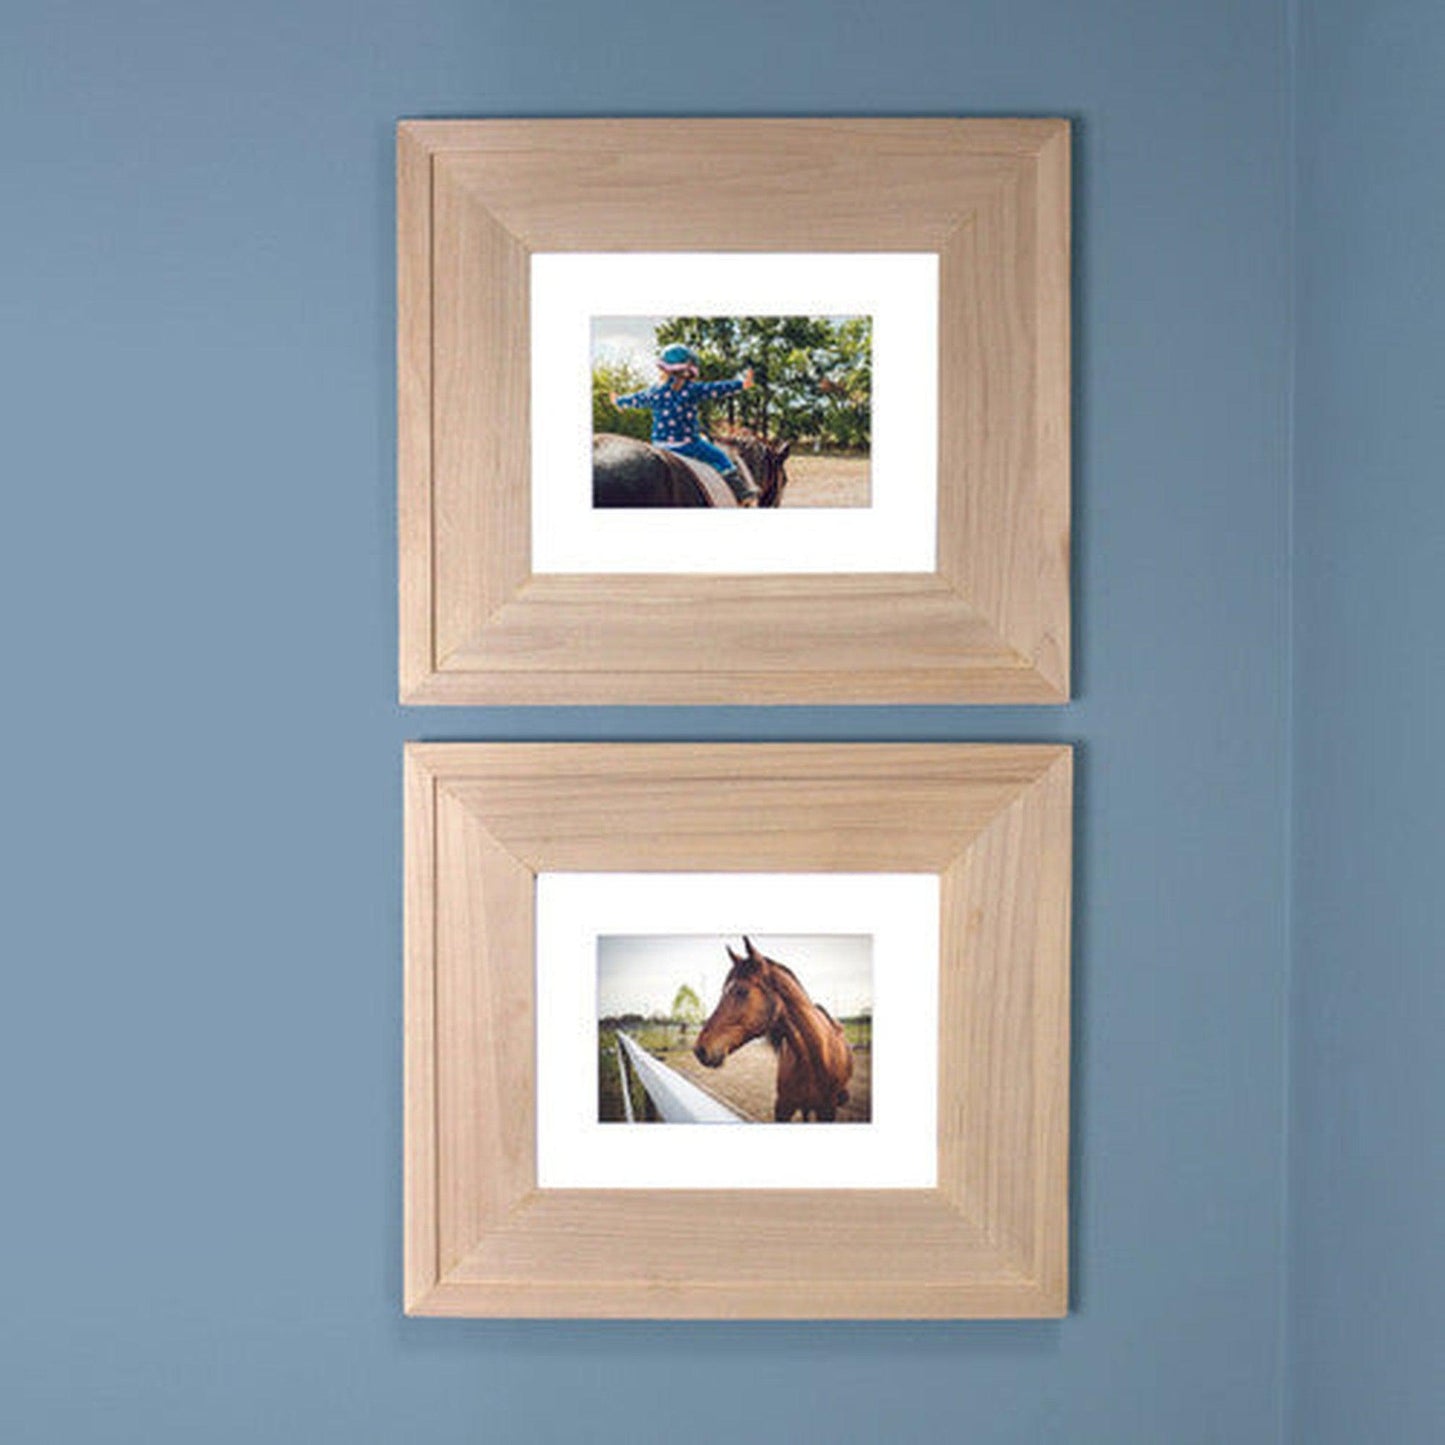 Fox Hollow Furnishings 14" x 11" Unfinished Raised Edge Compact Landscape Special 6" Depth Recessed Picture Frame Medicine Cabinet